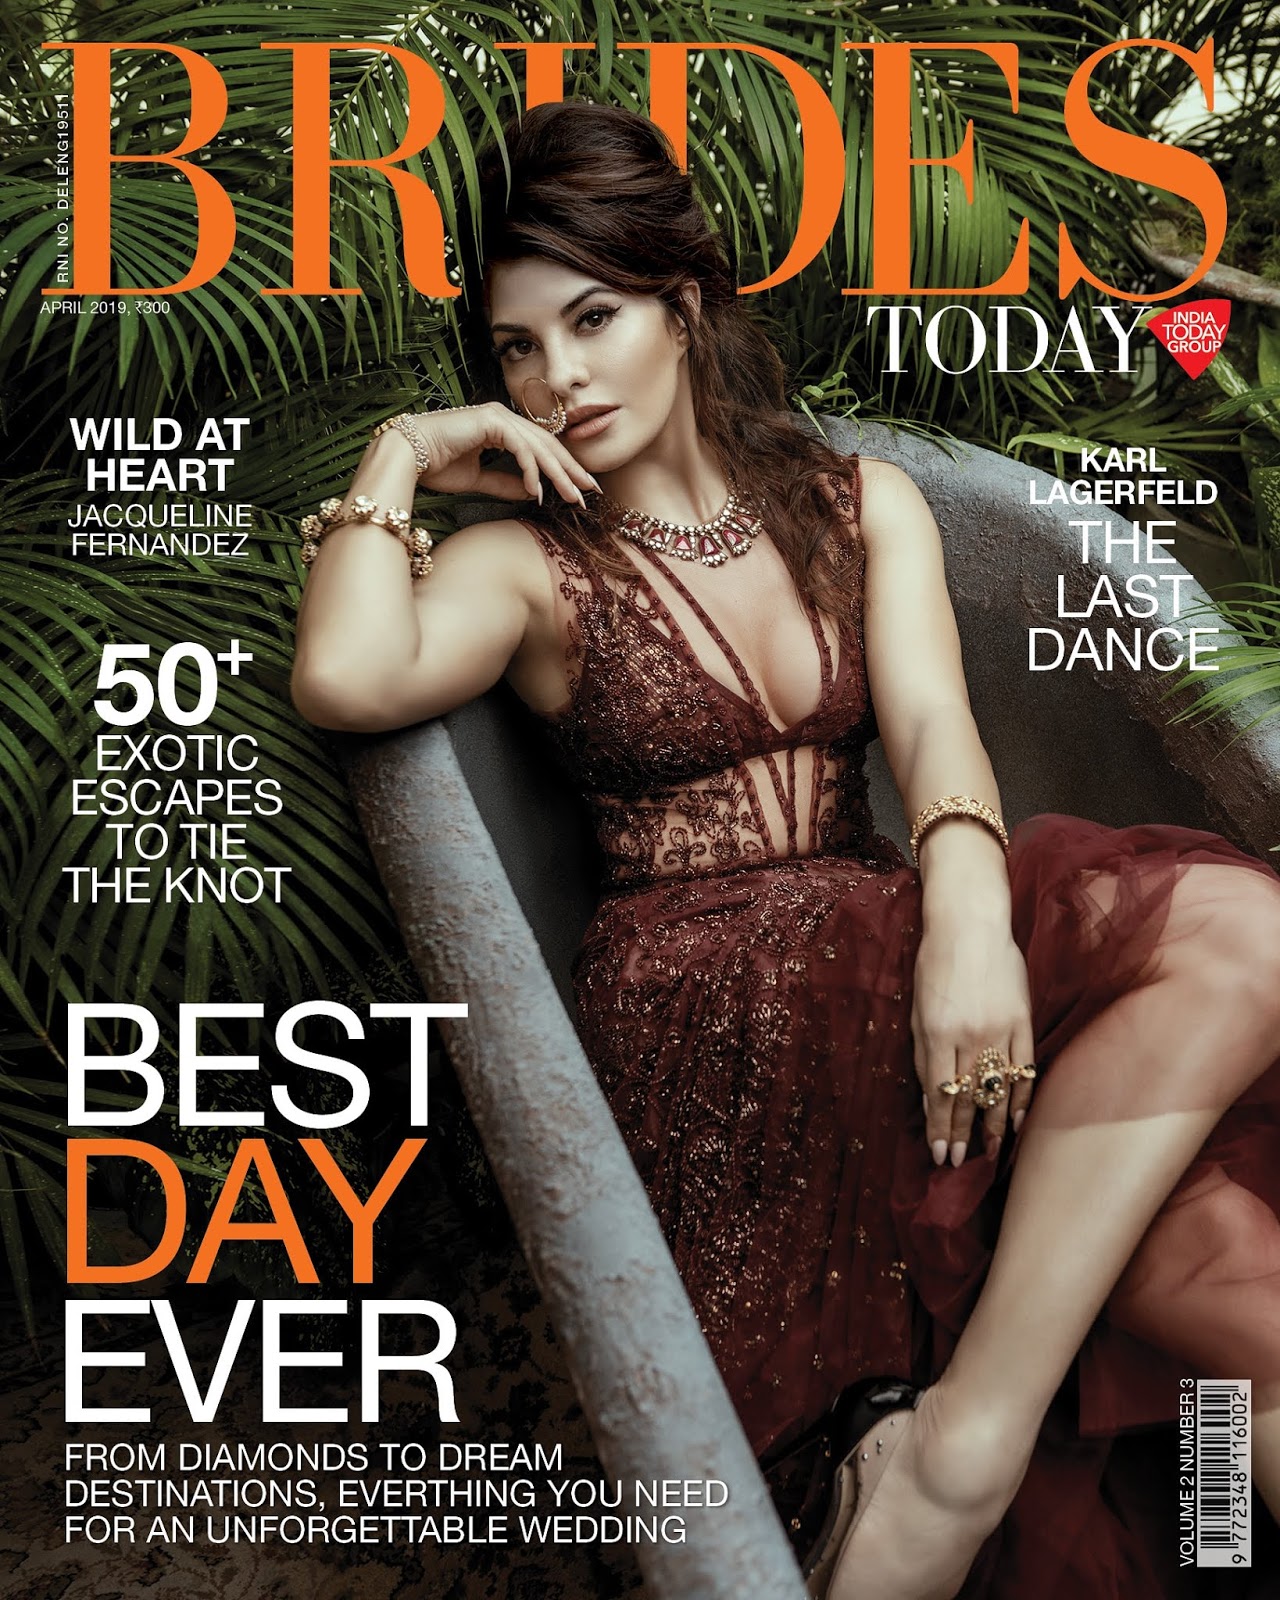 Jacqueline Fernandez Sizzles on the April 2019 Cover of Brides Today